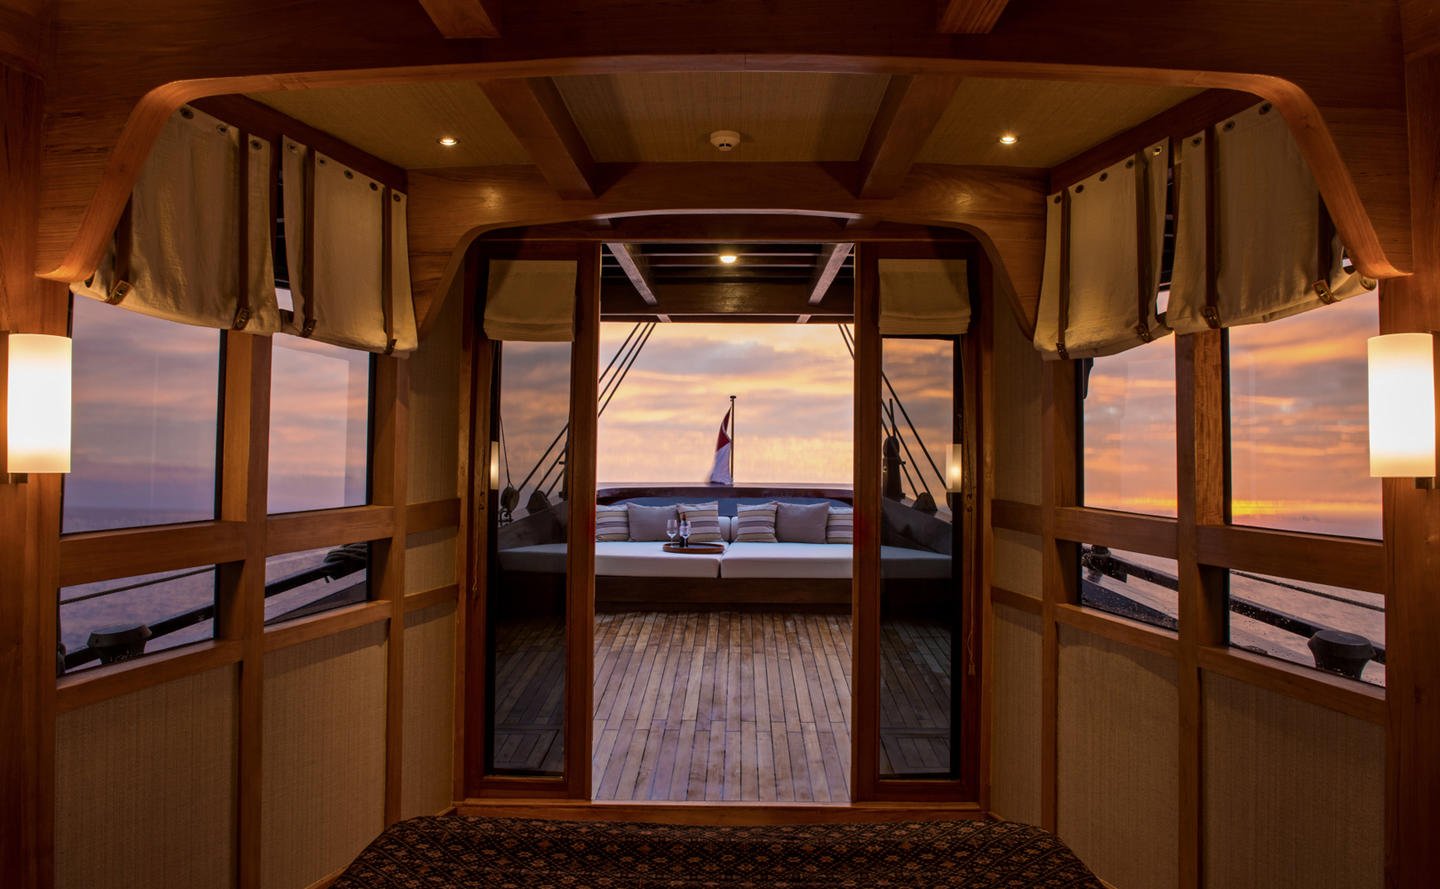 A look at the deck at sunset onboard Amandira luxury yacht